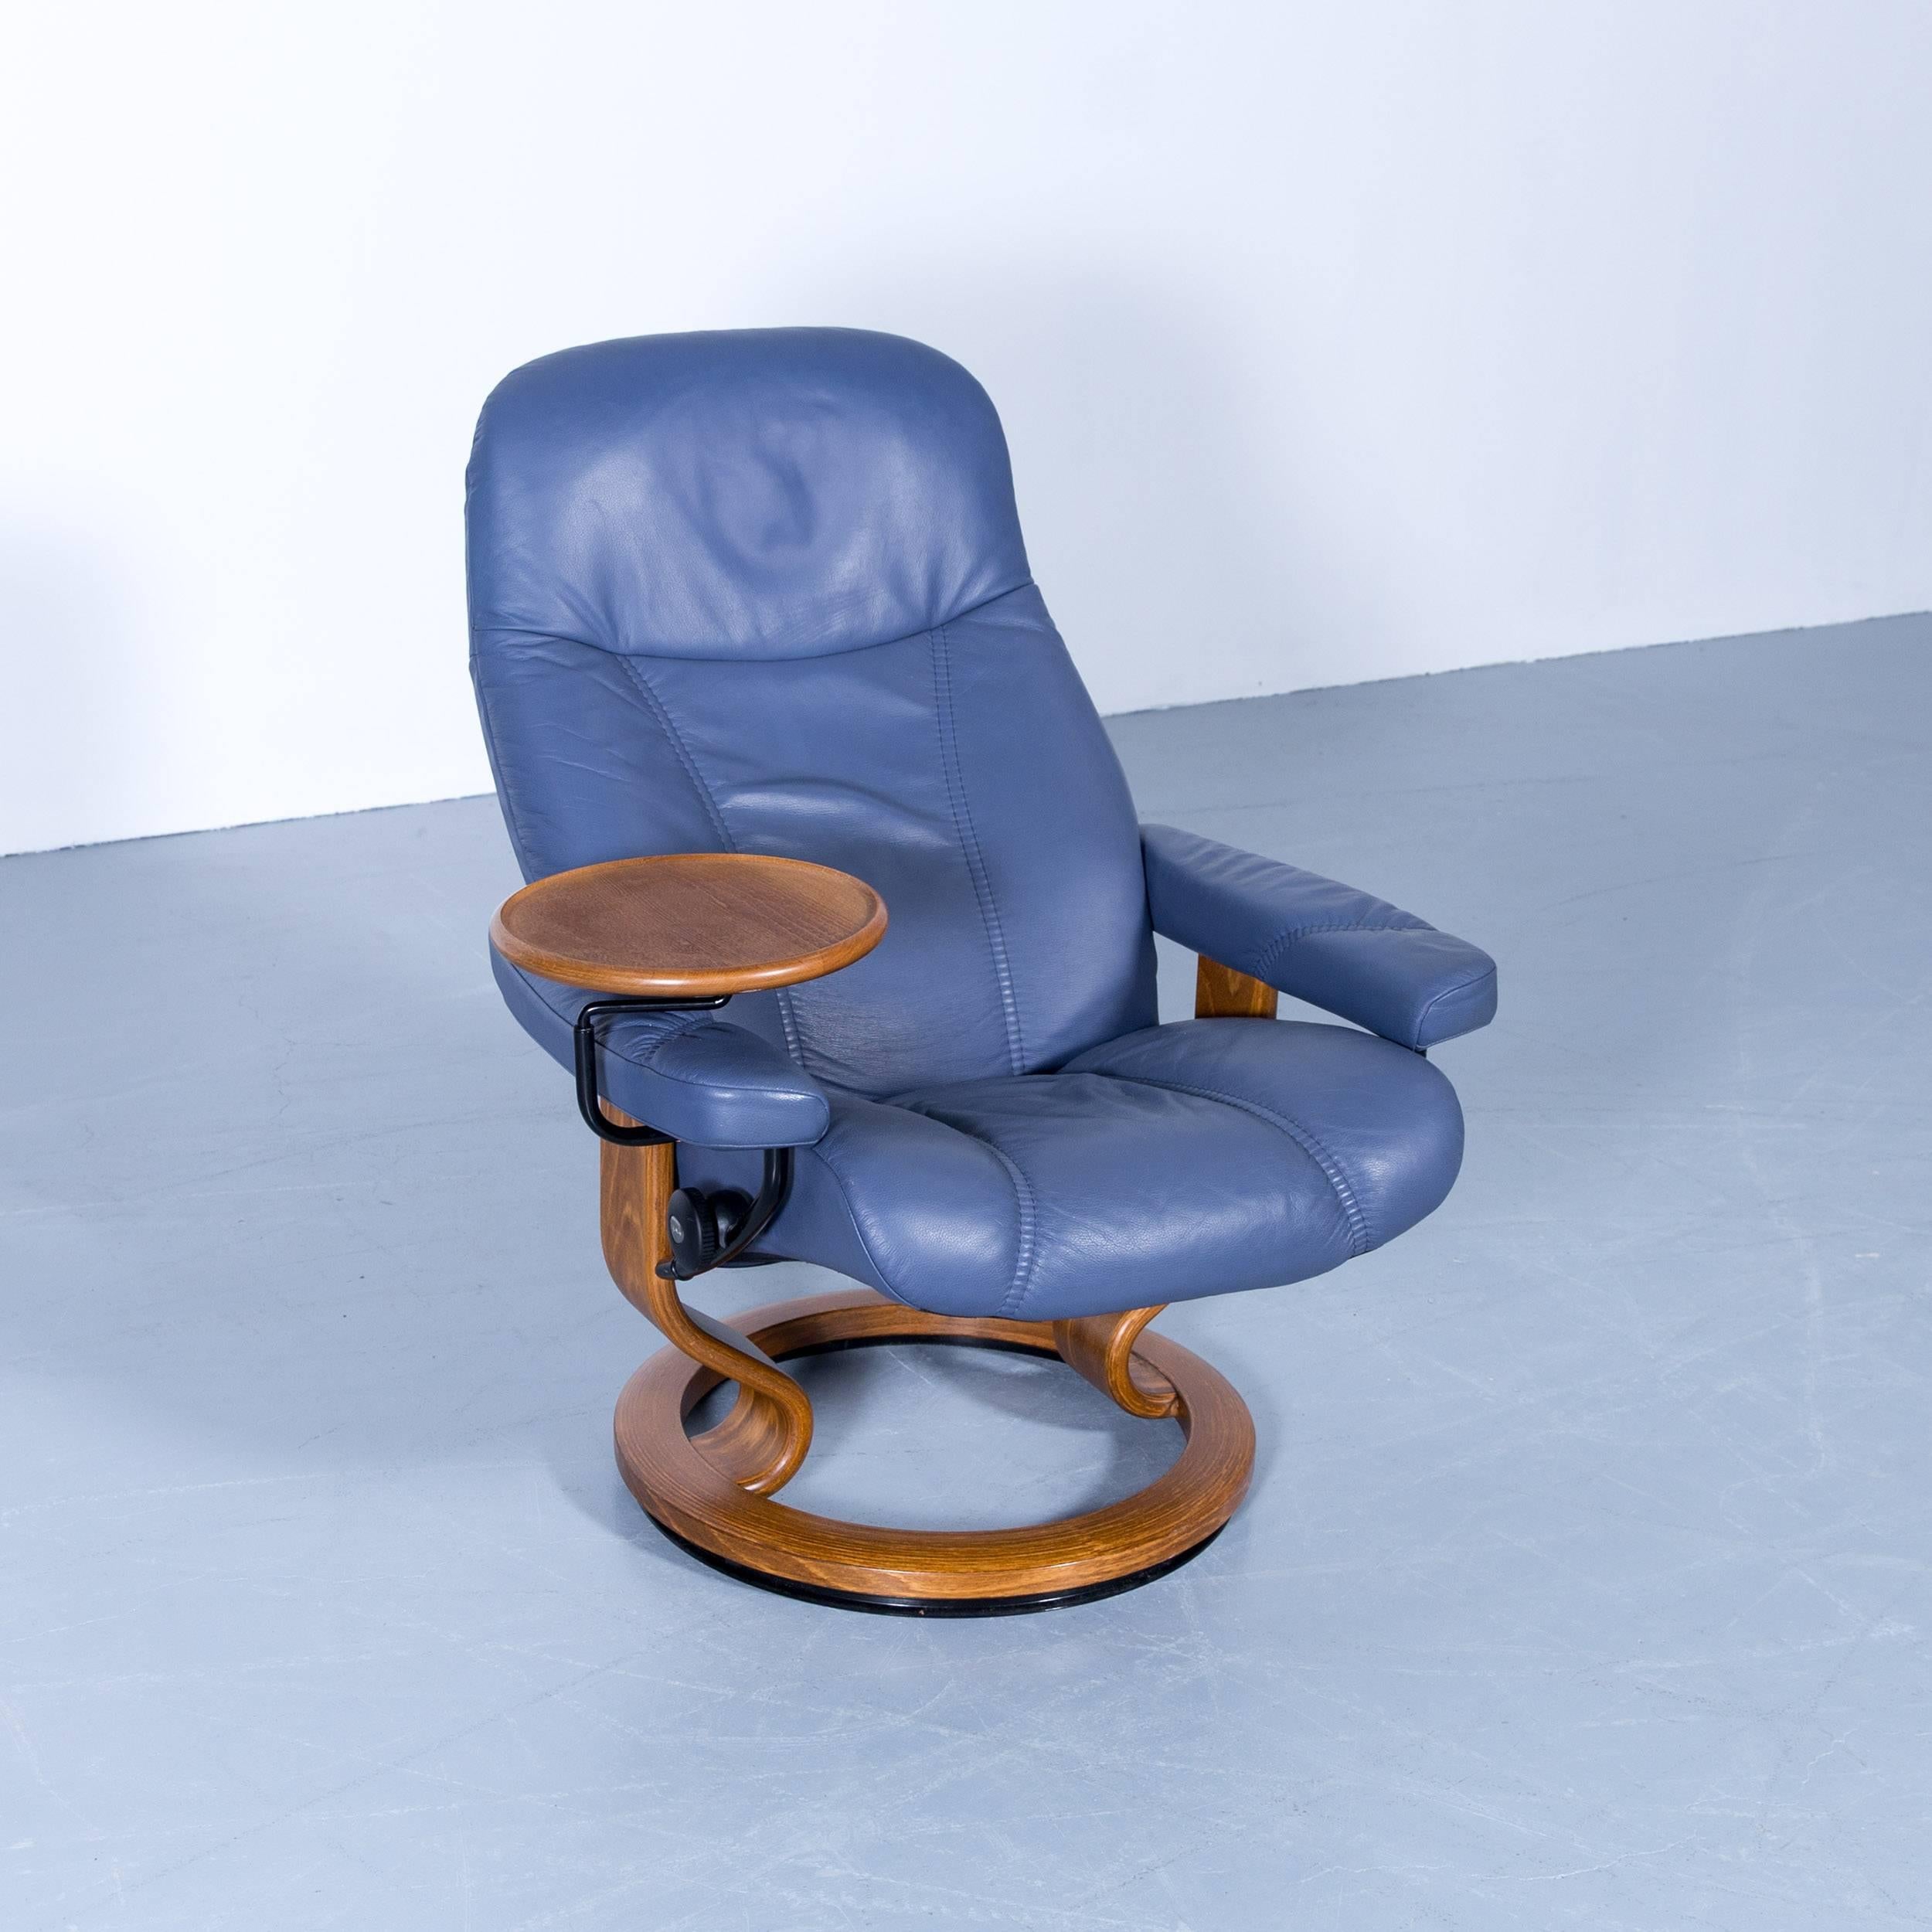 Contemporary Stressless Consul Relax Armchair and Footstool Set Blue Leather Relax Function